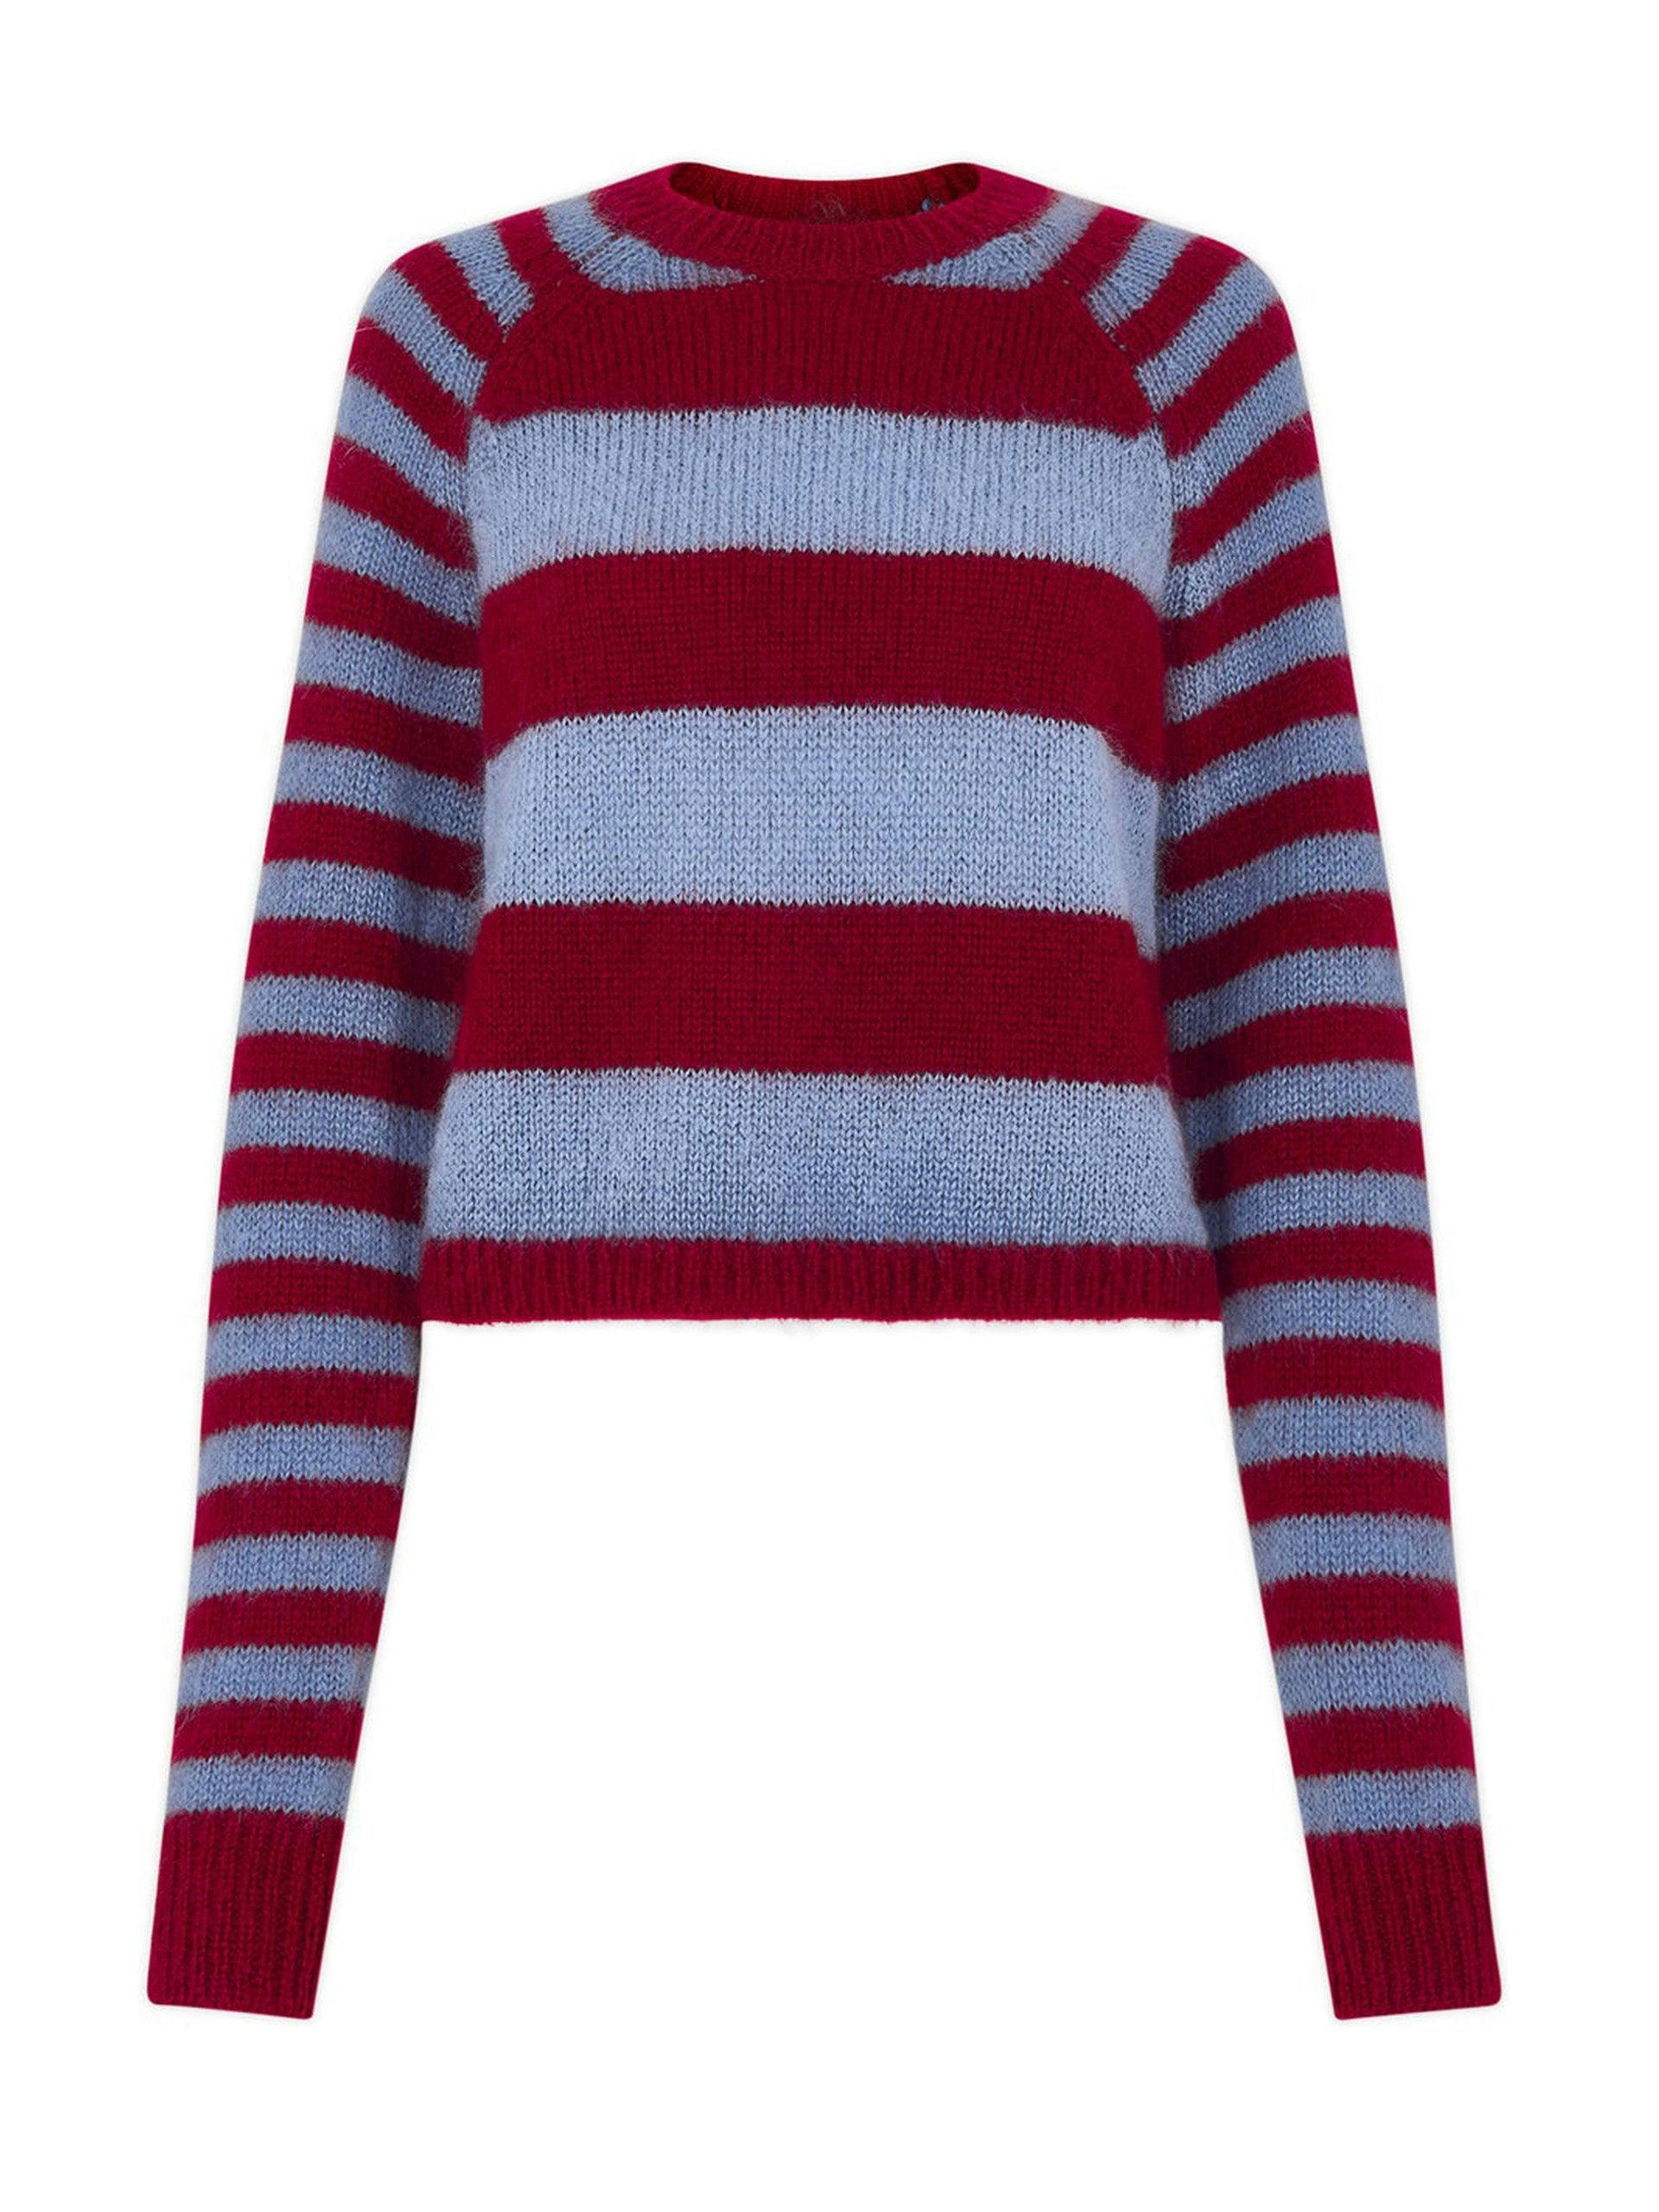 Red and blue striped jumper